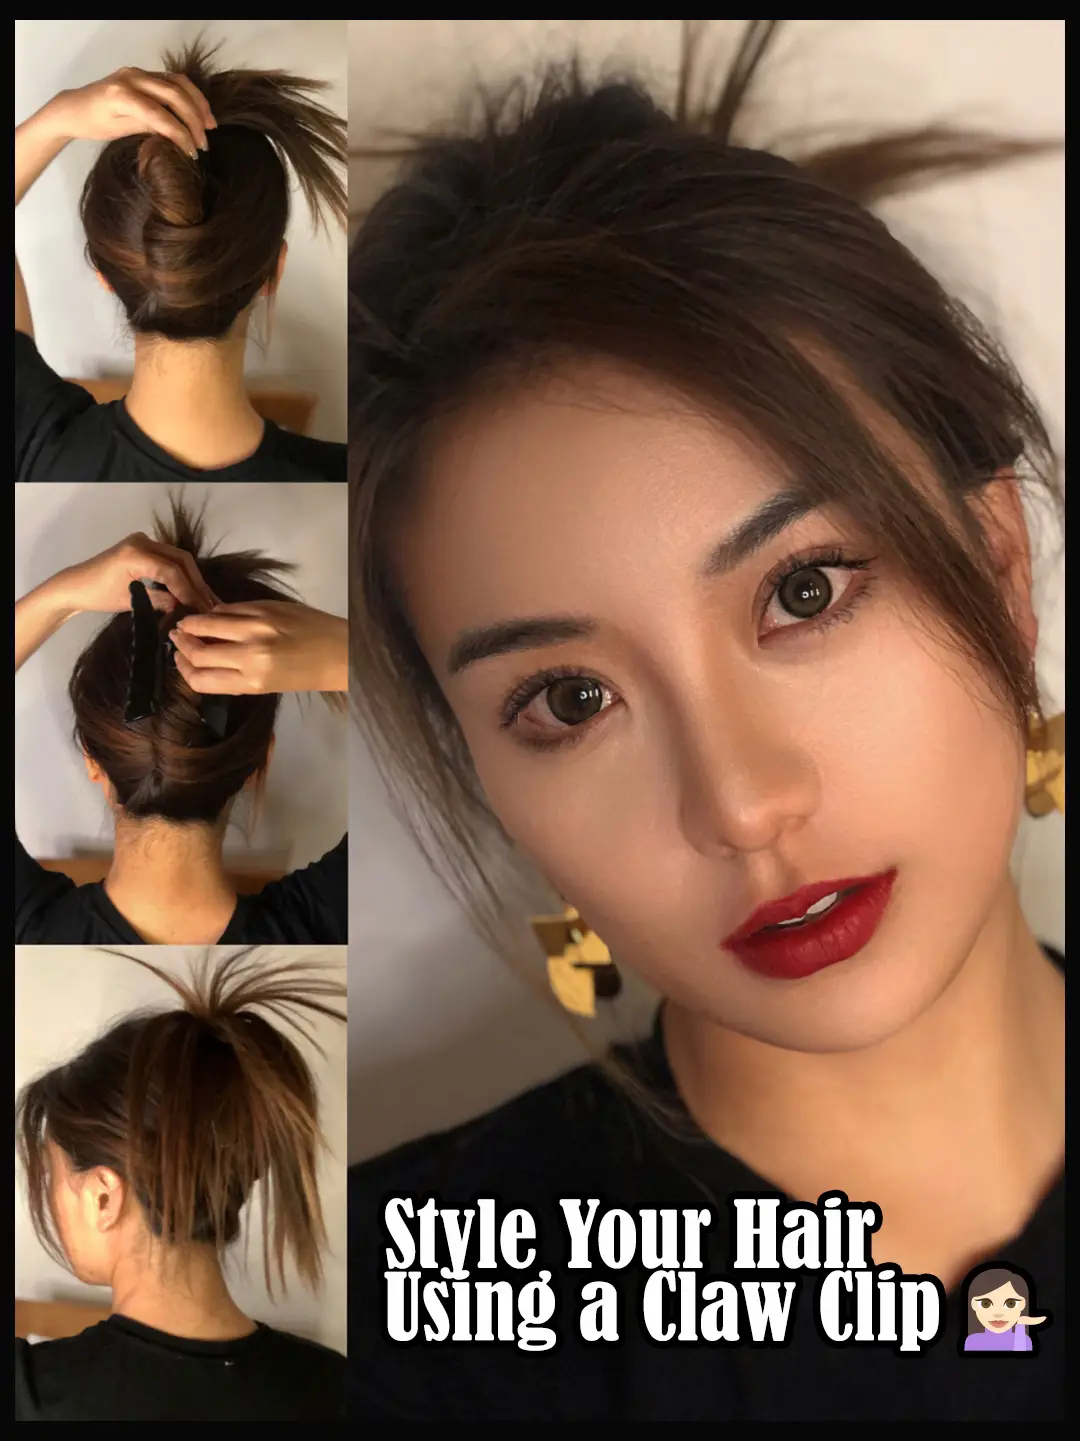 How To Style Your Hair Using a Claw Clip